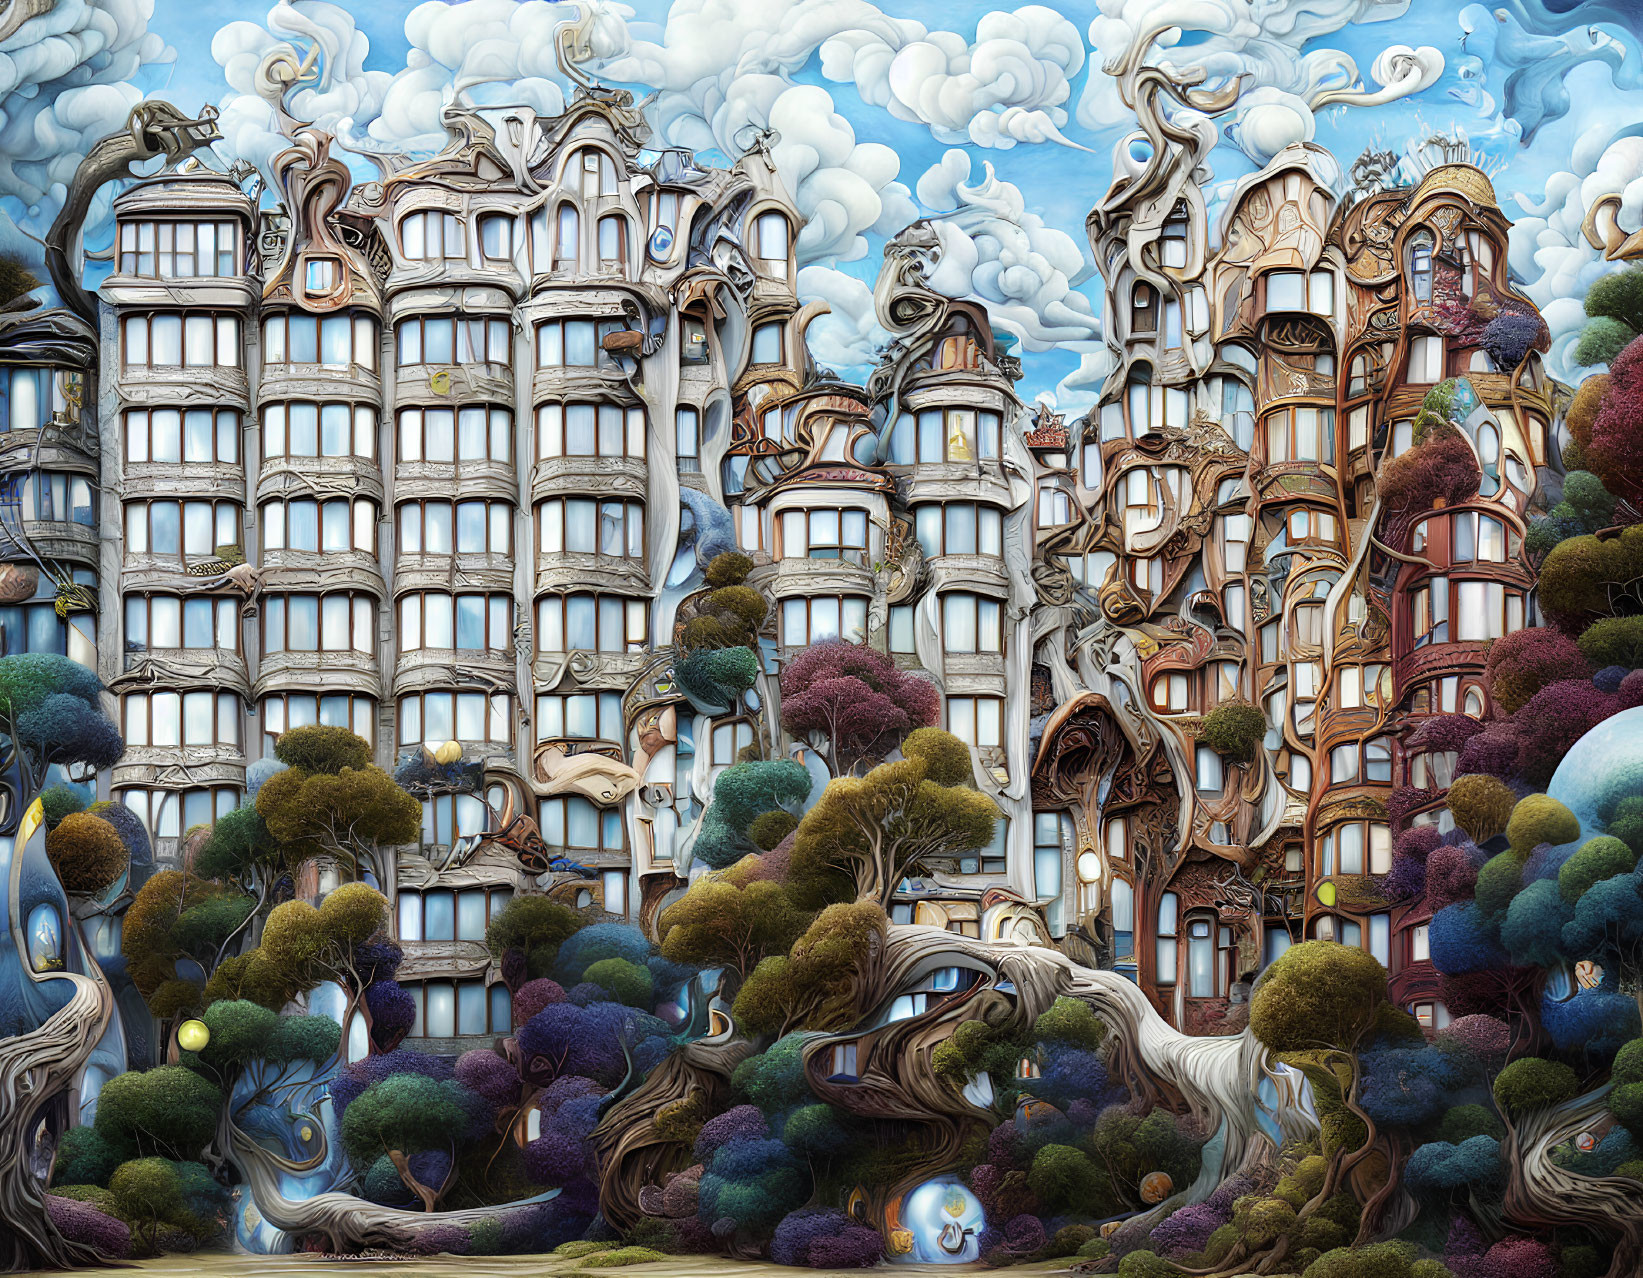 Intricate surreal illustration of organic buildings merging with trees under a whimsical blue sky